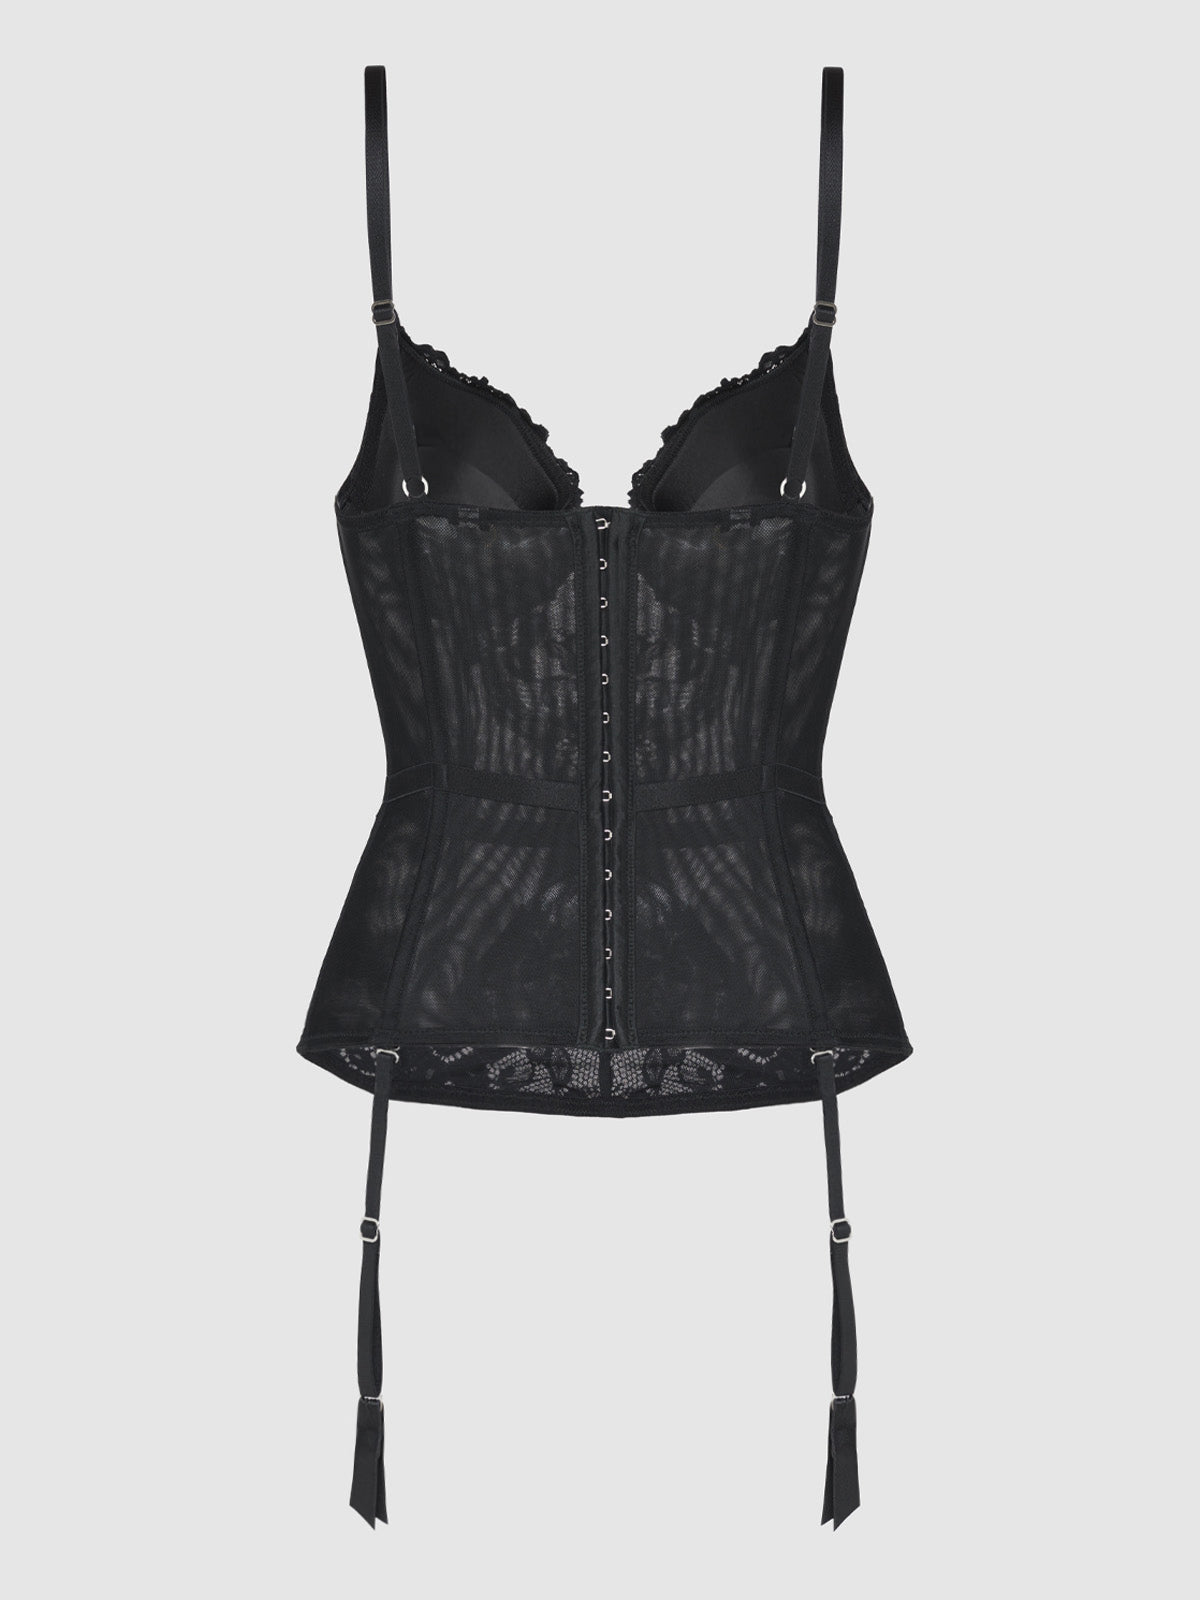 Jessica Lace Corset - Fredericks of Hollywood